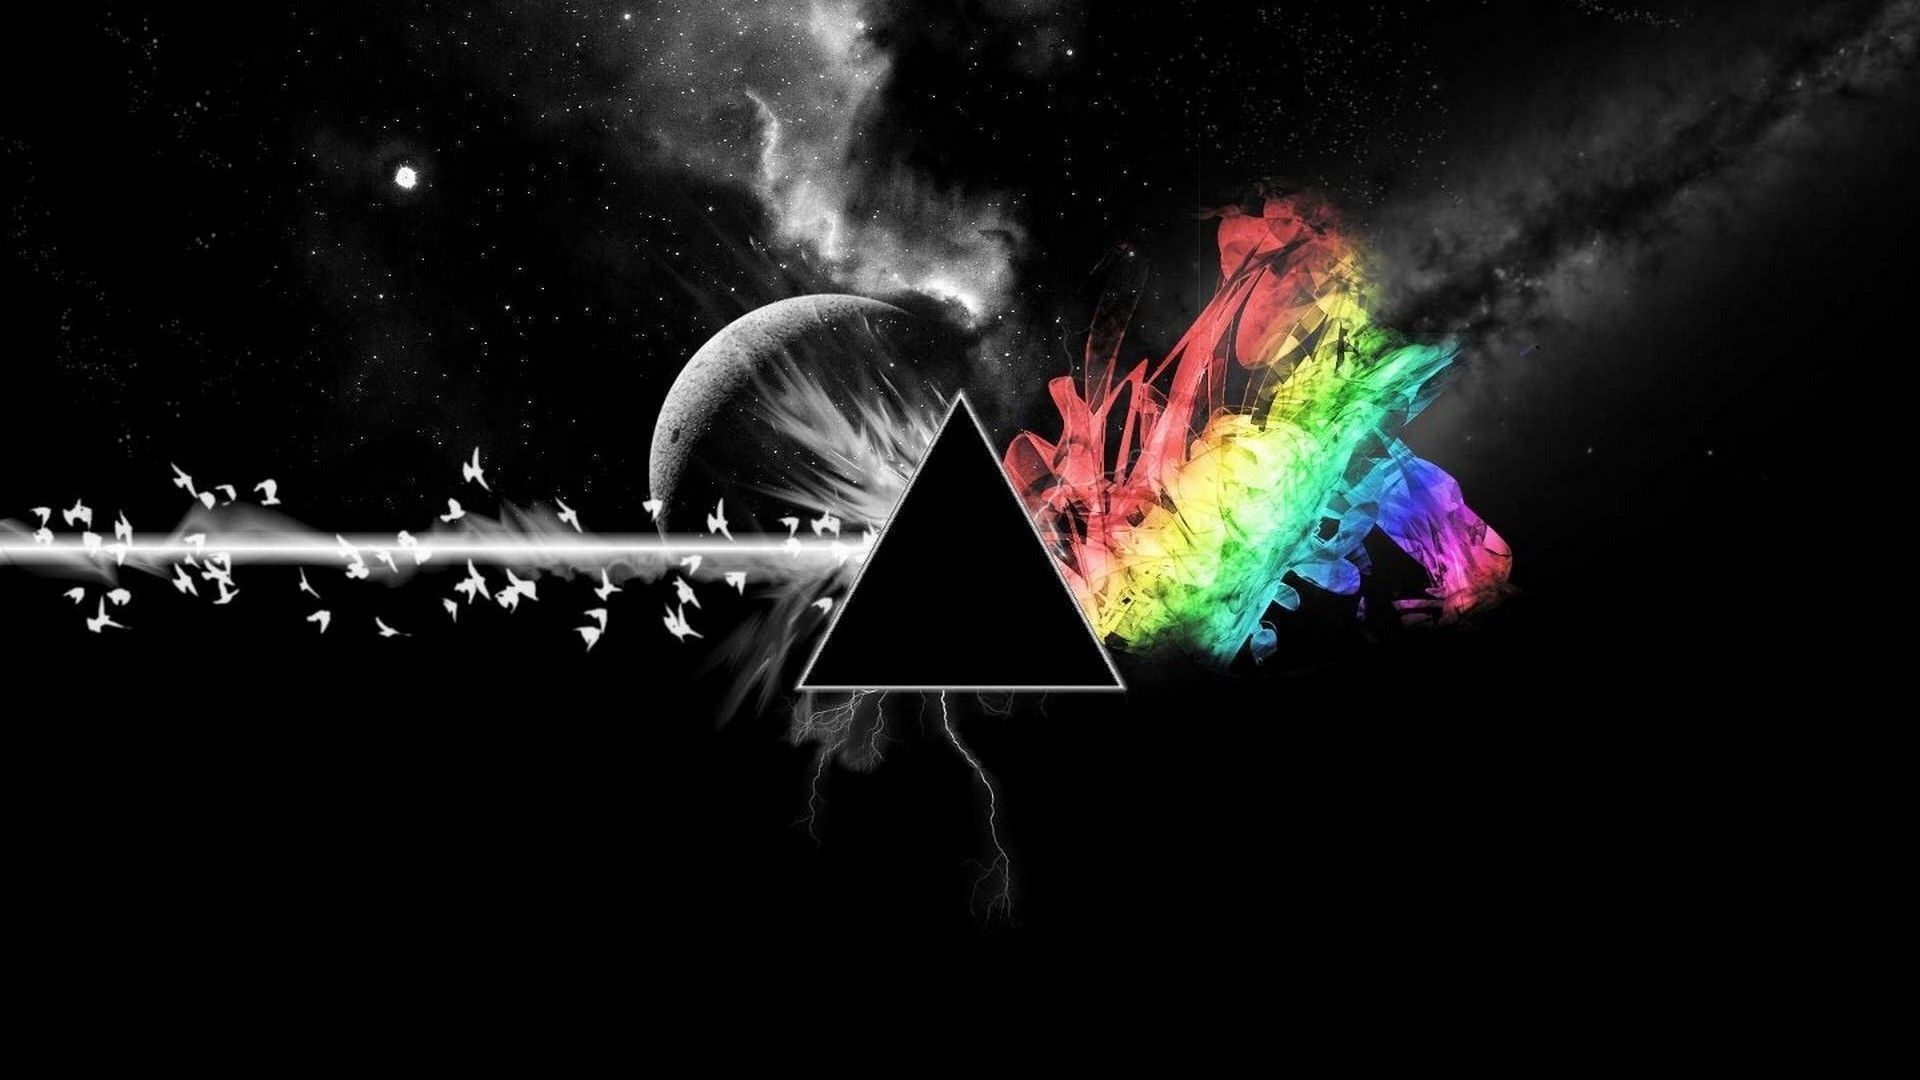 Coolest Wallpaper in the World. Pink floyd wallpaper, Cool desktop wallpaper, Pink floyd